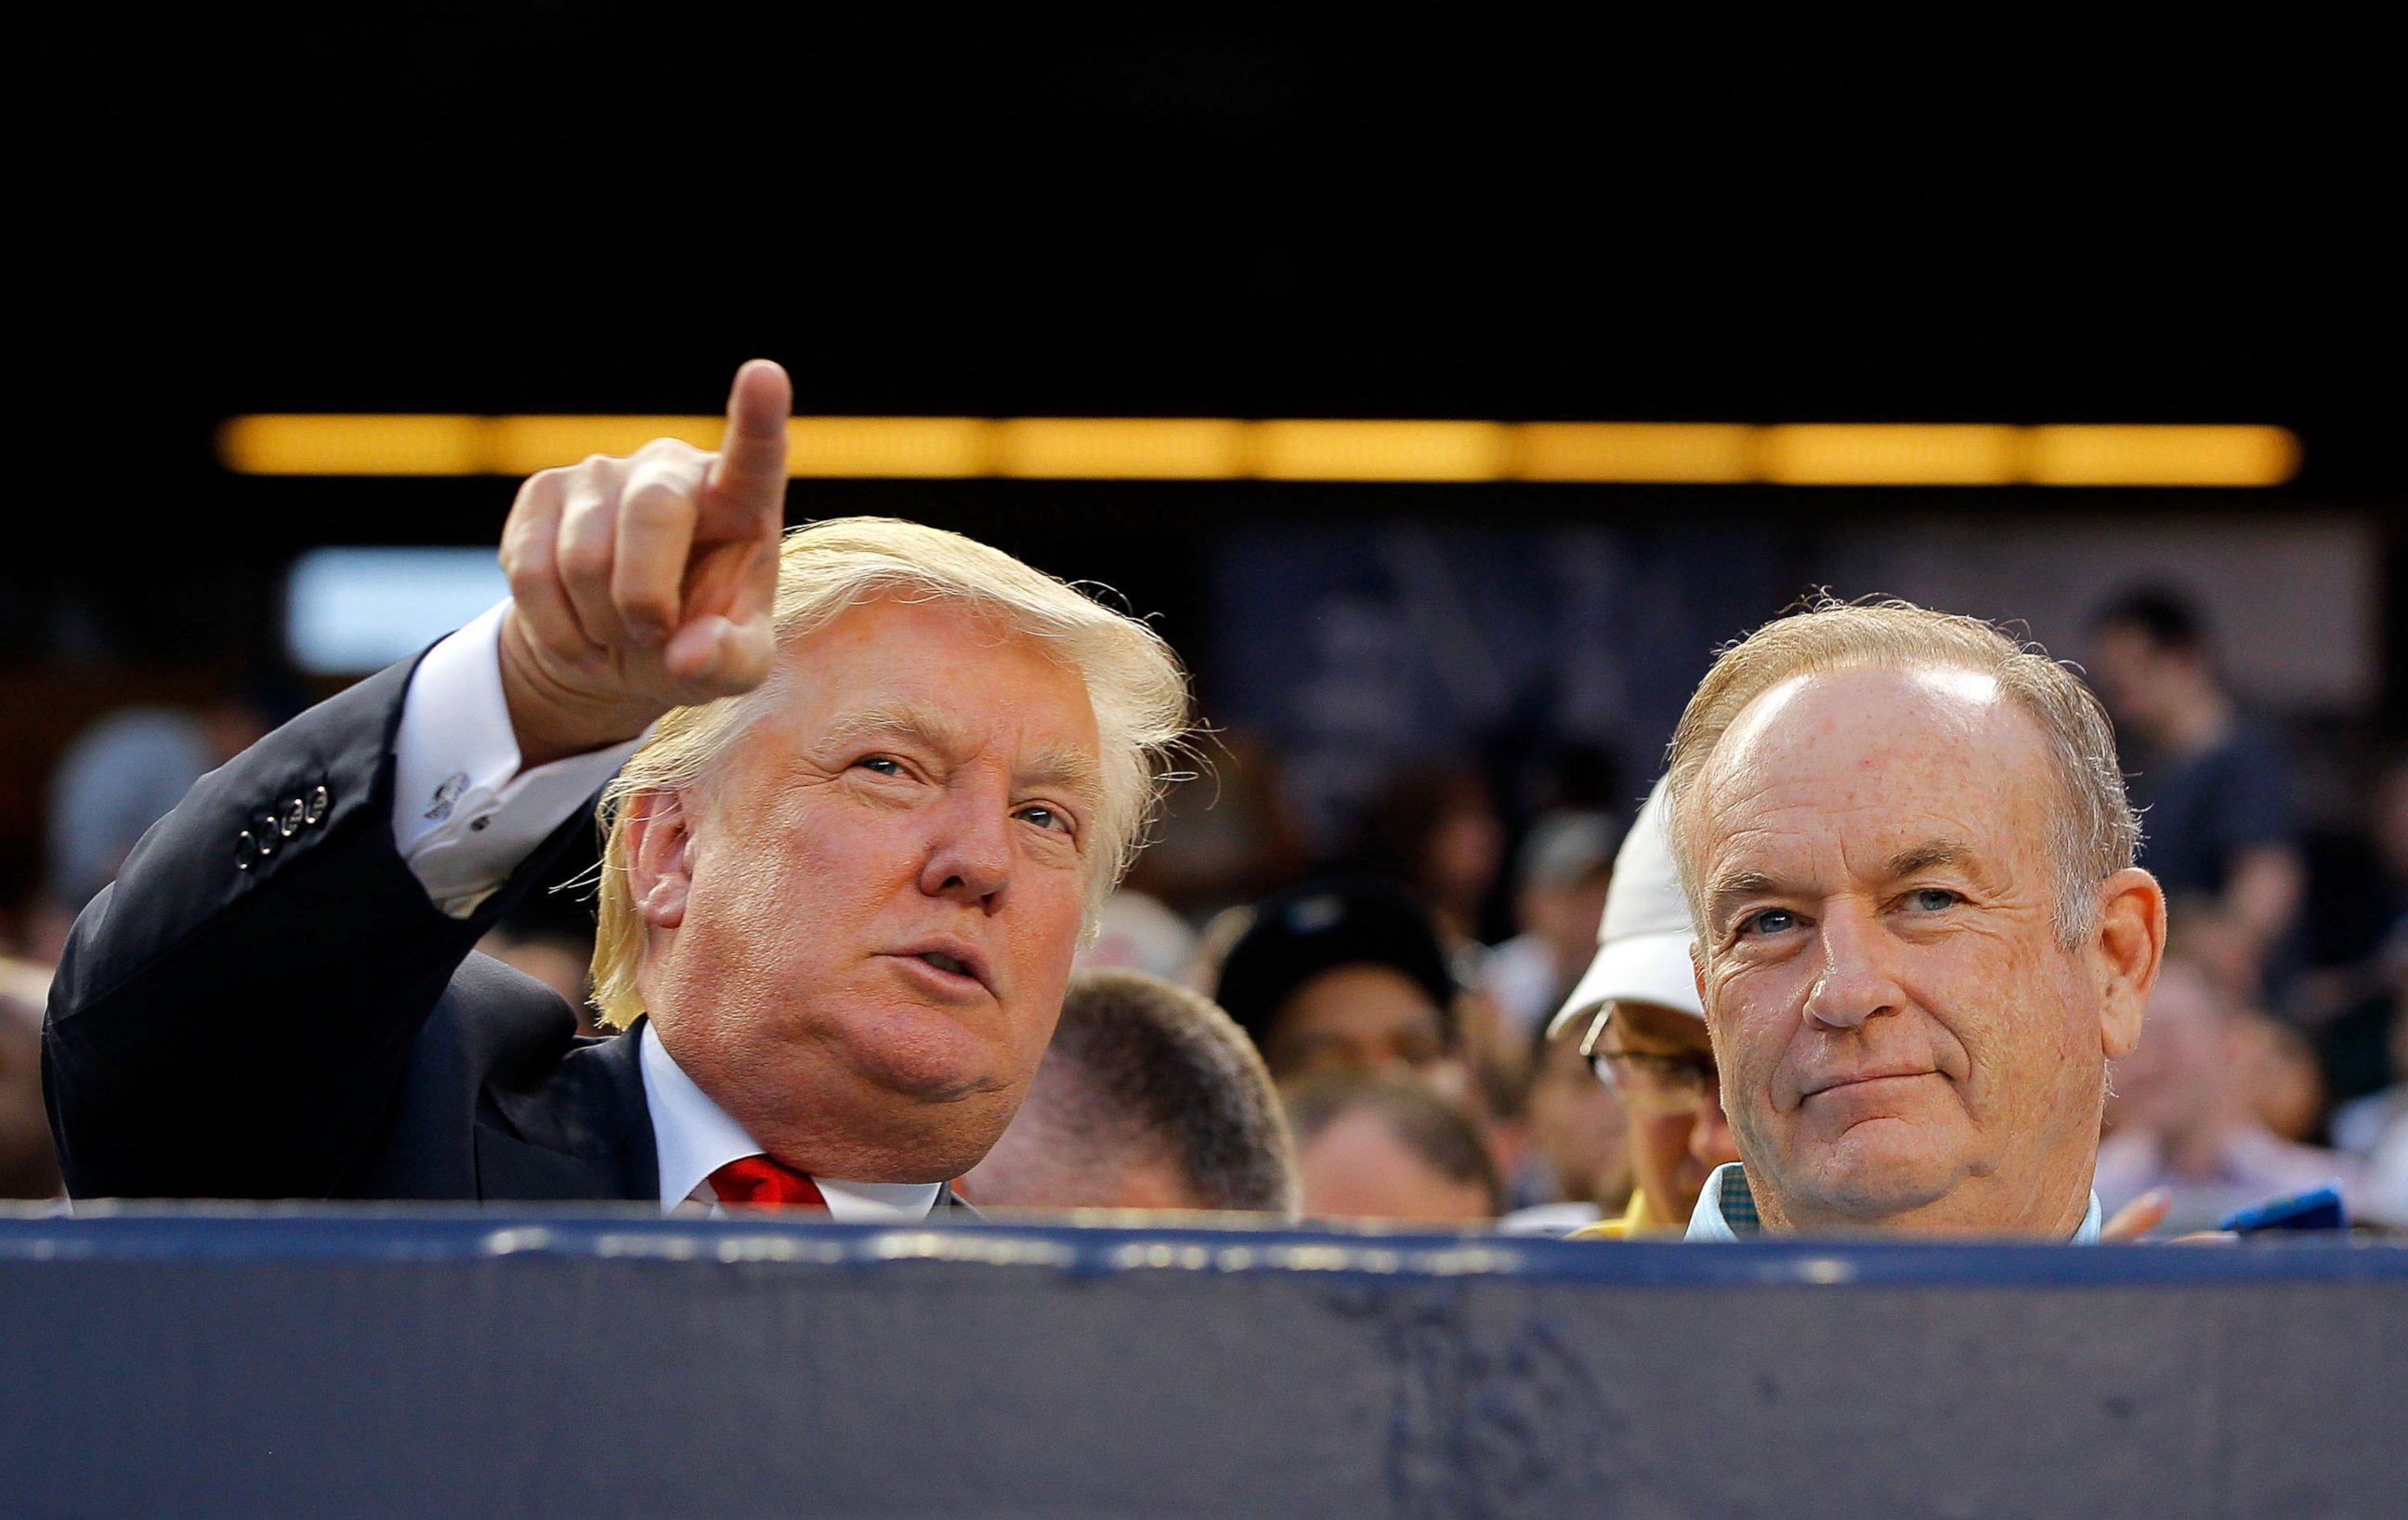 PHOTO: Donald Trump and Bill O'Reilly attend a game between the New York Yankees and the Baltimore Orioles at Yankee Stadium, July 30, 2012, in New York City. 